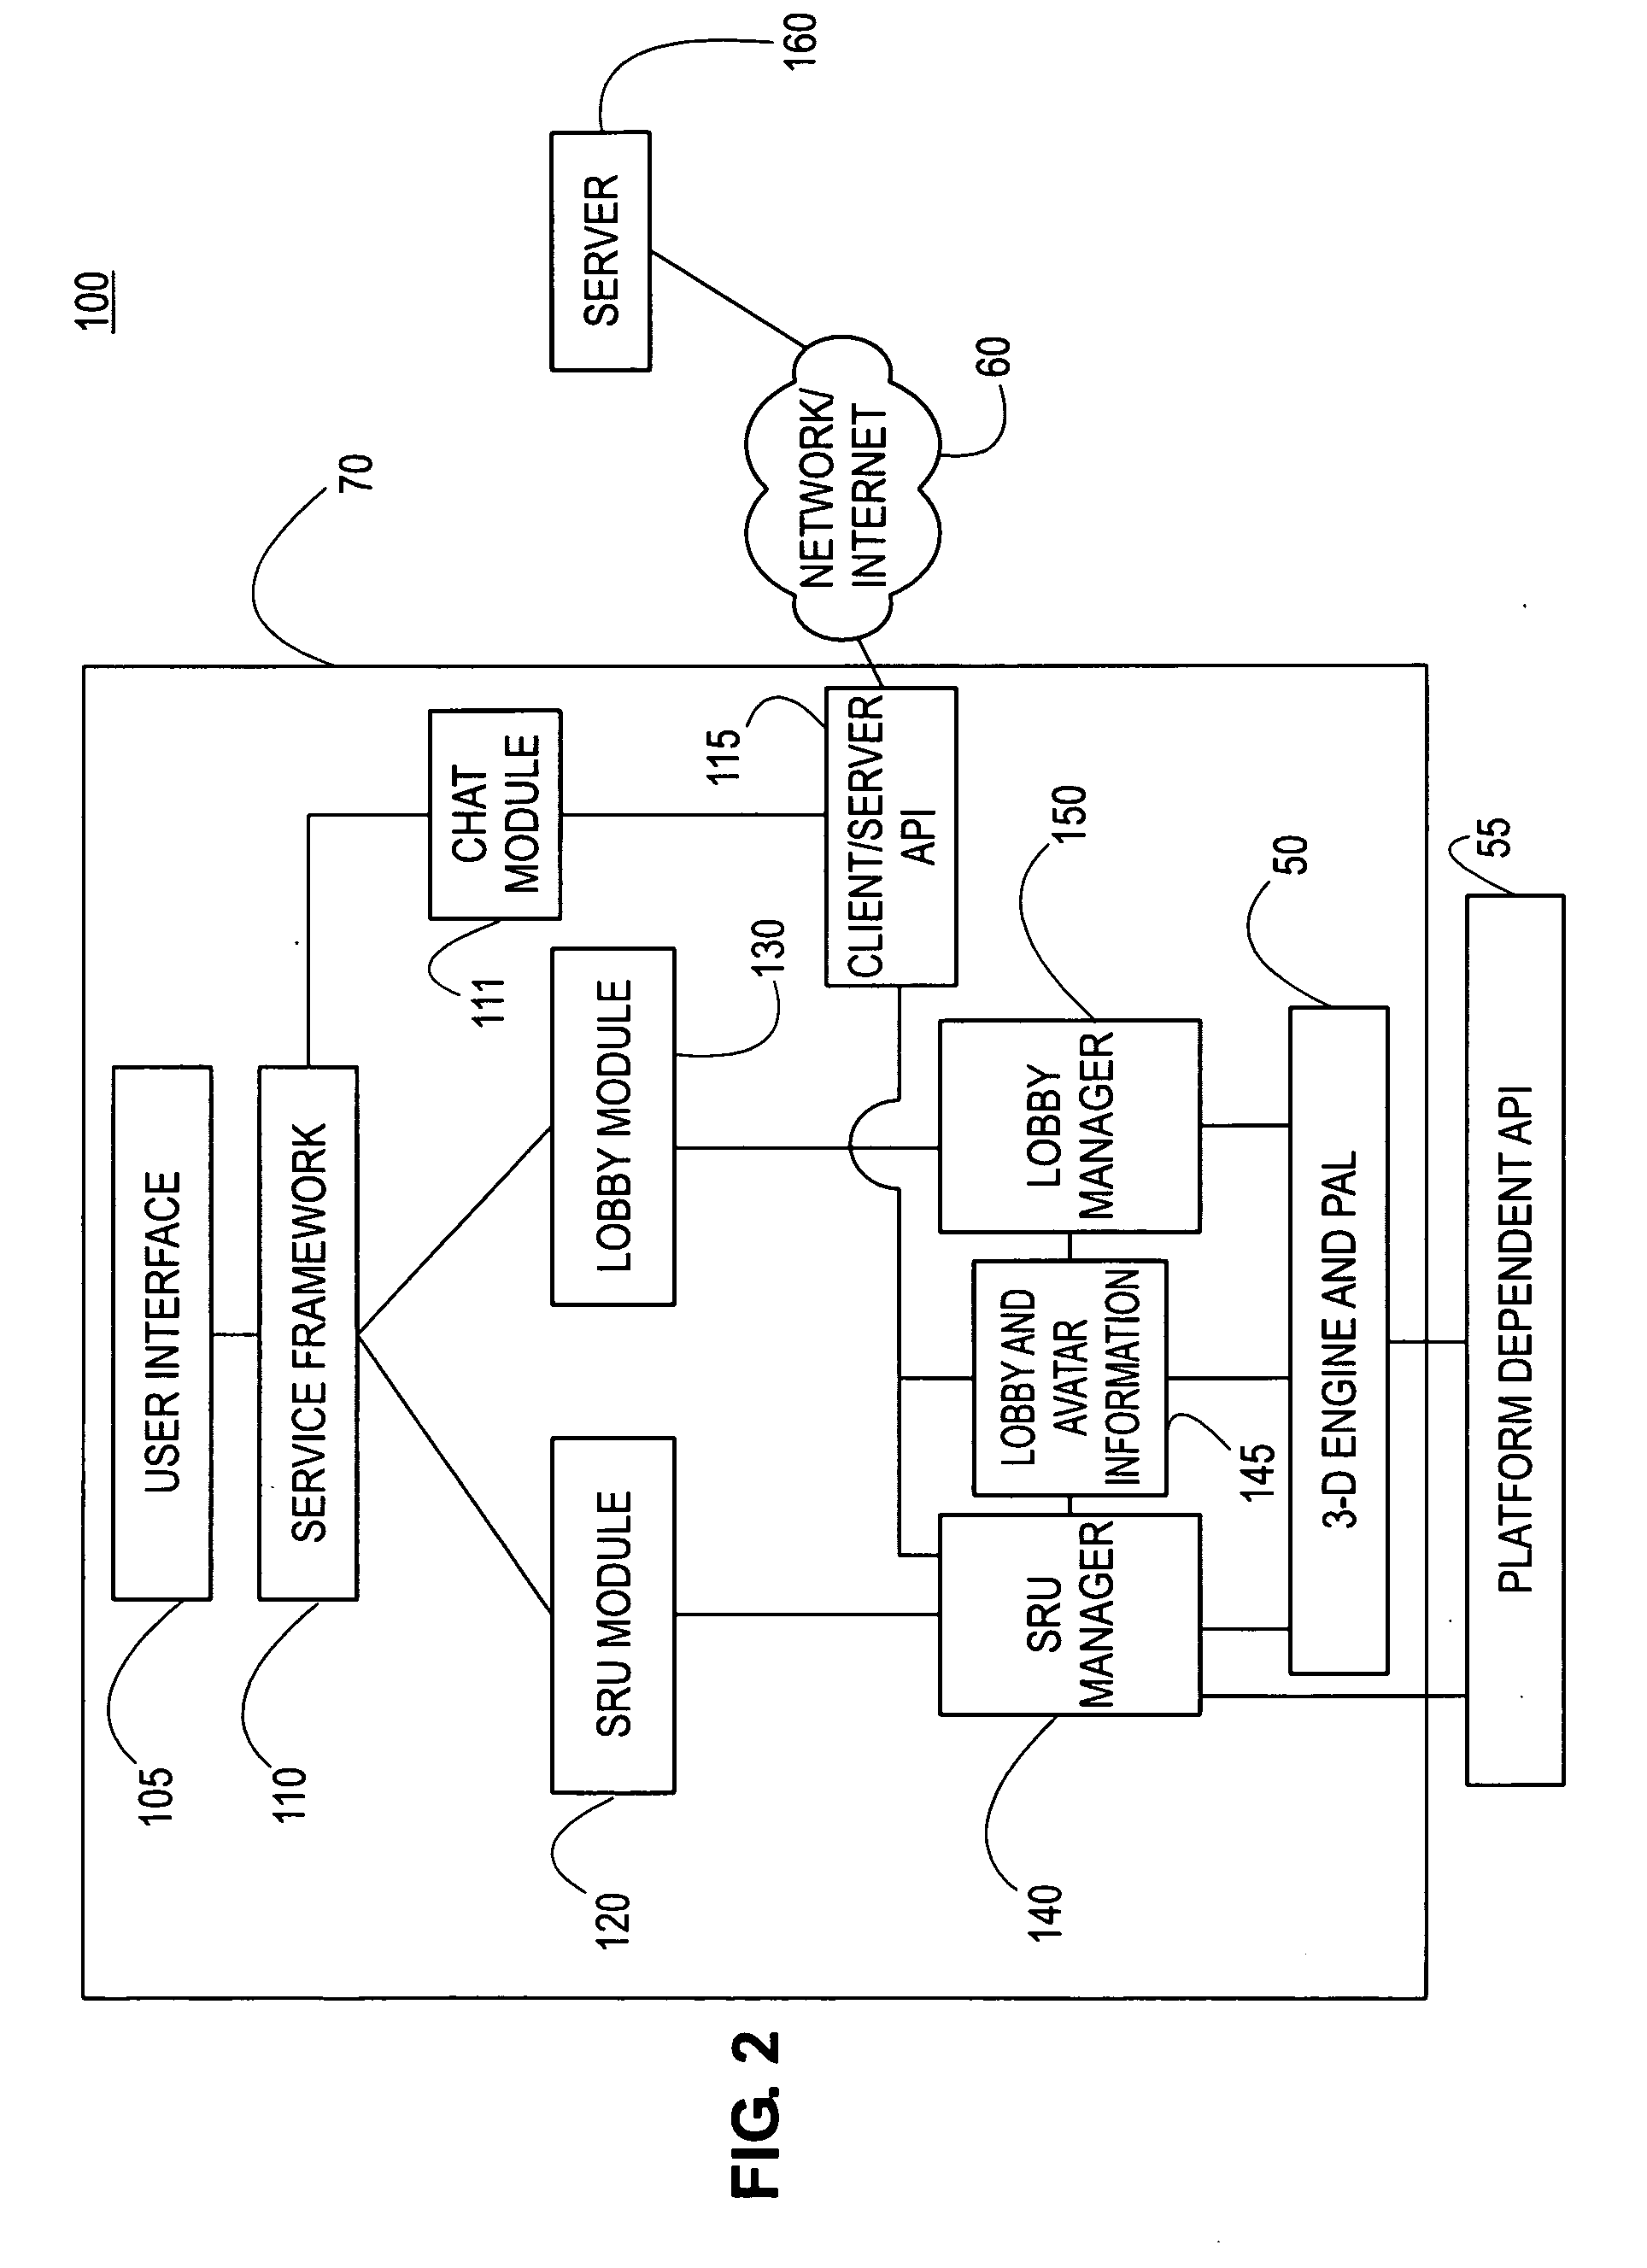 Systems and methods for providing an online lobby